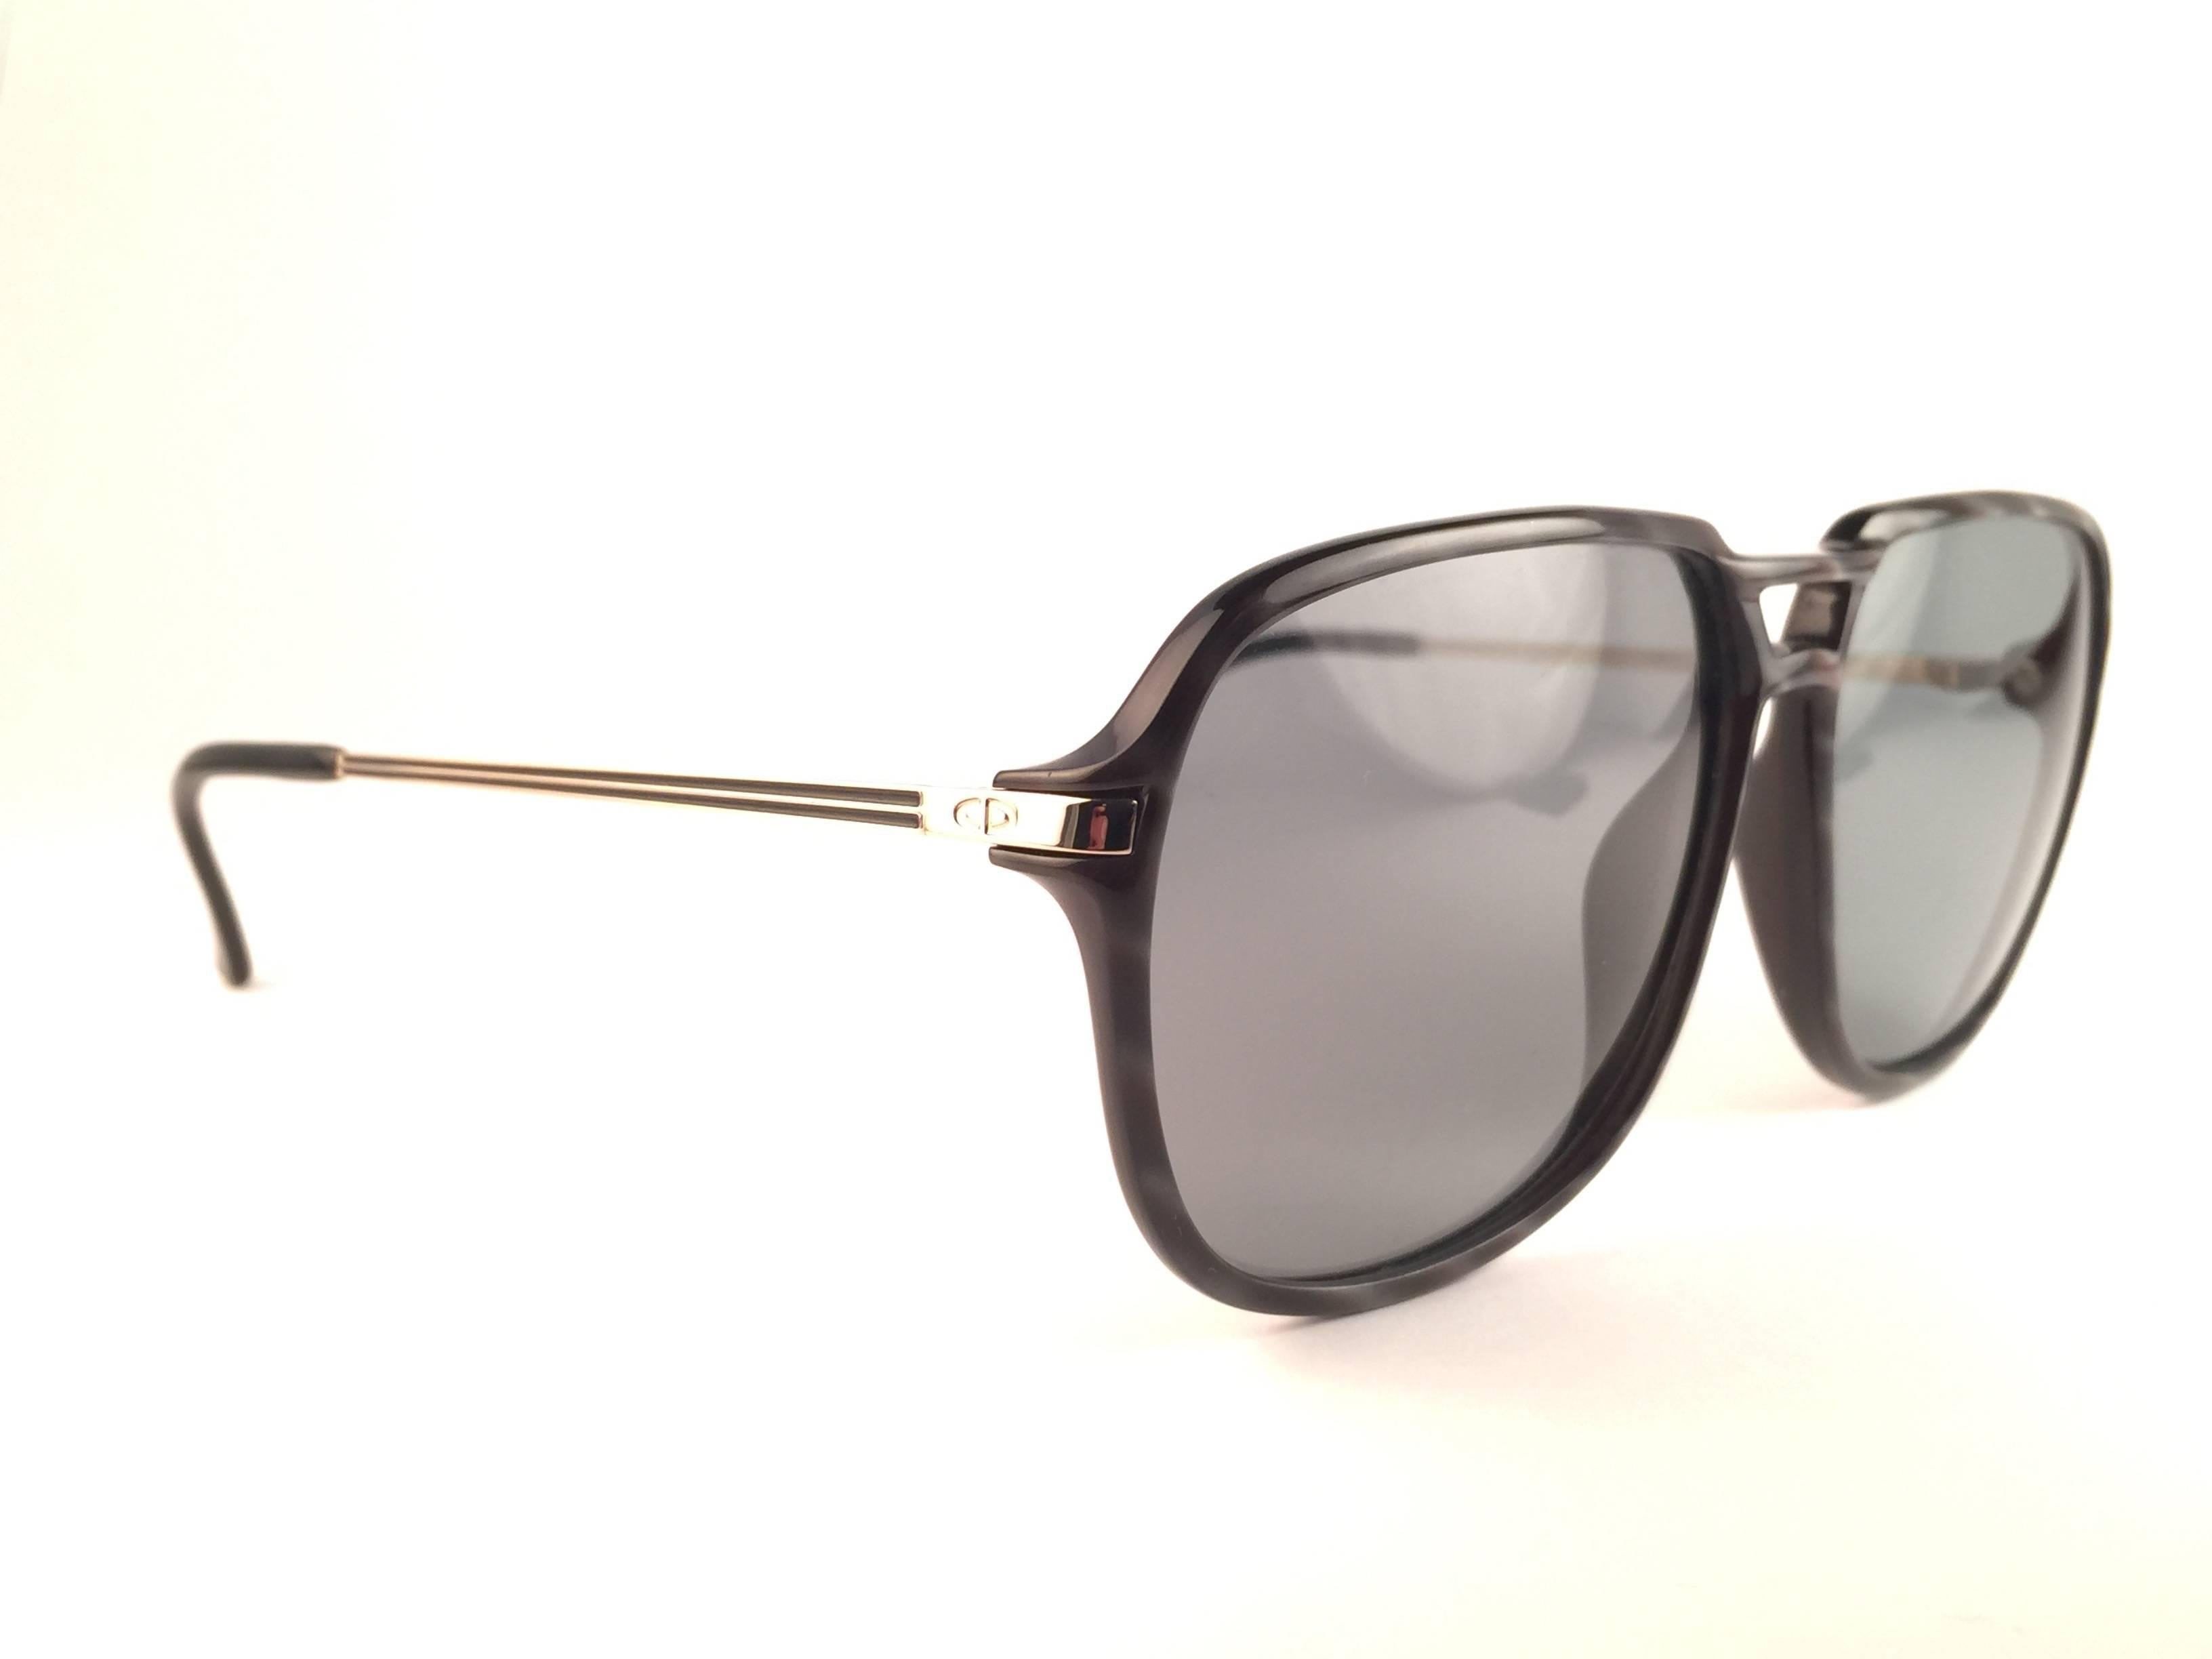 
New Vintage Christian Dior 2296 90 Sunglasses oversized black & white stripped frame with spotless smoke grey lenses 1970’s made by Optyl. 

Manufactured in Austria
 
New! never worn or displayed. 

Flawless pair!!!
